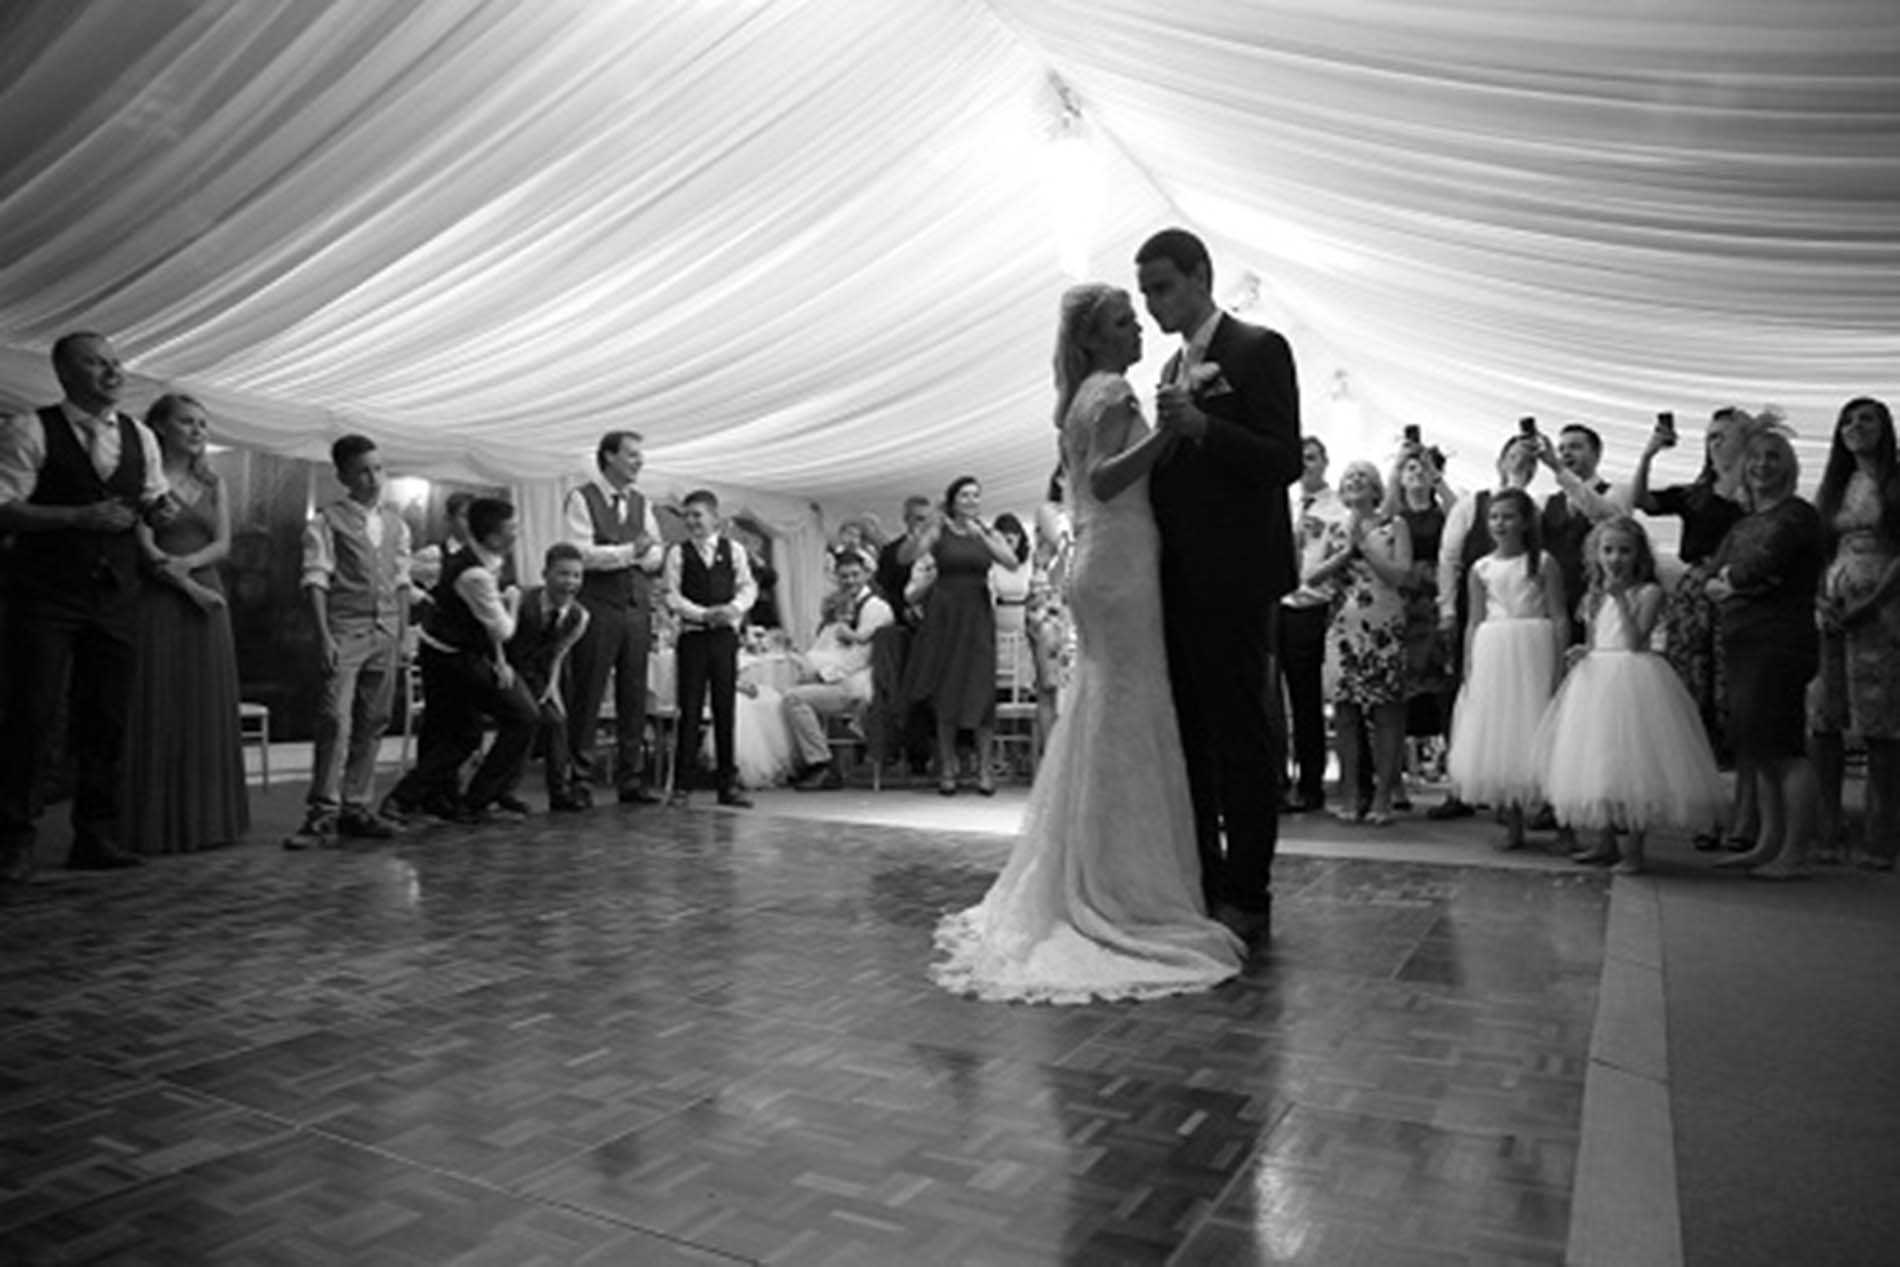 Wedding venue west wales, places to visit mid wales, dog friendly accommodation west wales